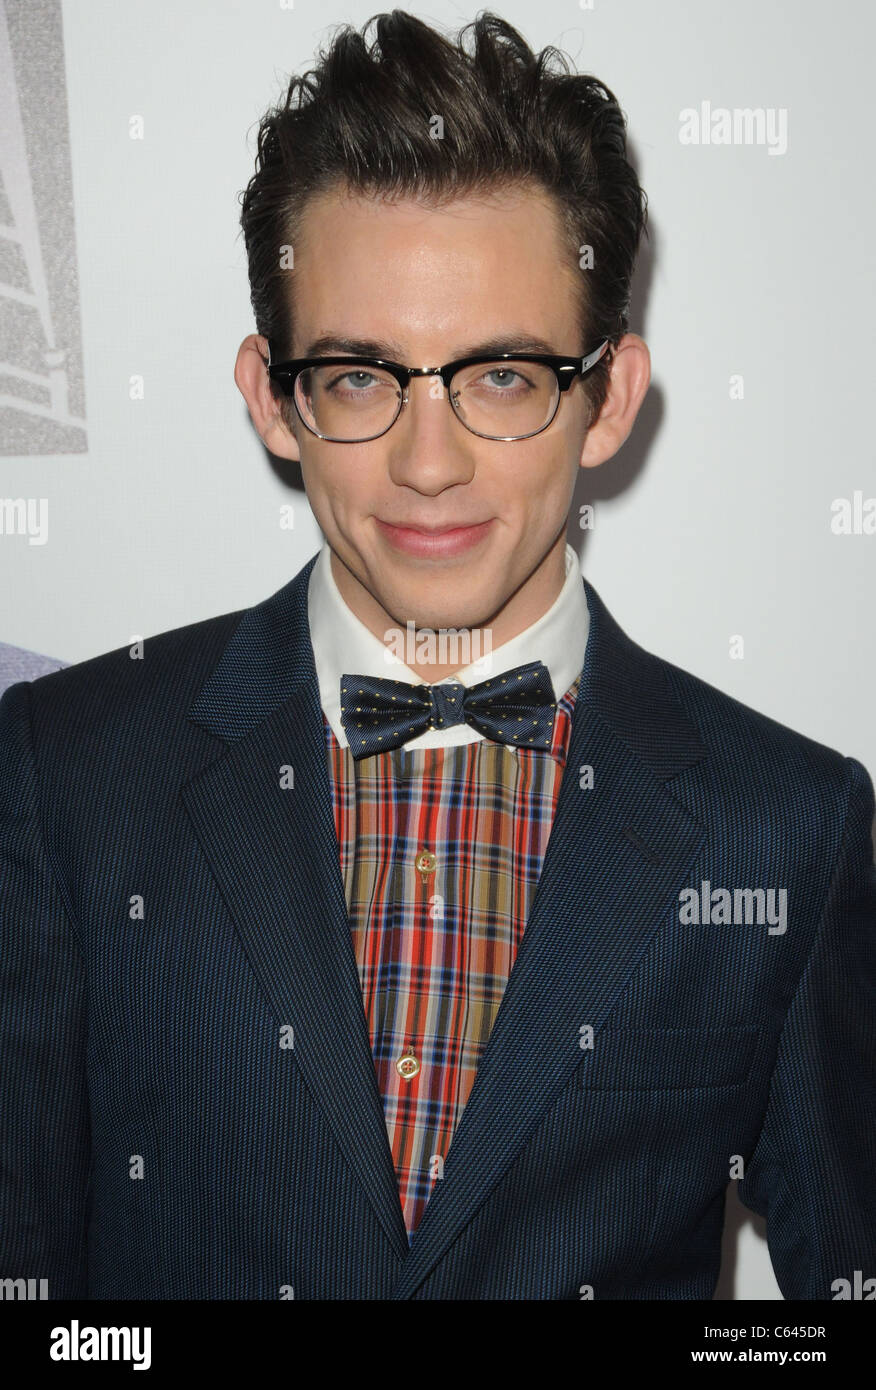 Kevin McHale at arrivals for Annual STARS 2010 Benefit Gala, Beverly Hilton Hotel, Beverly Hills, CA November 1, 2010. Photo By: Dee Cercone/Everett Collection Stock Photo